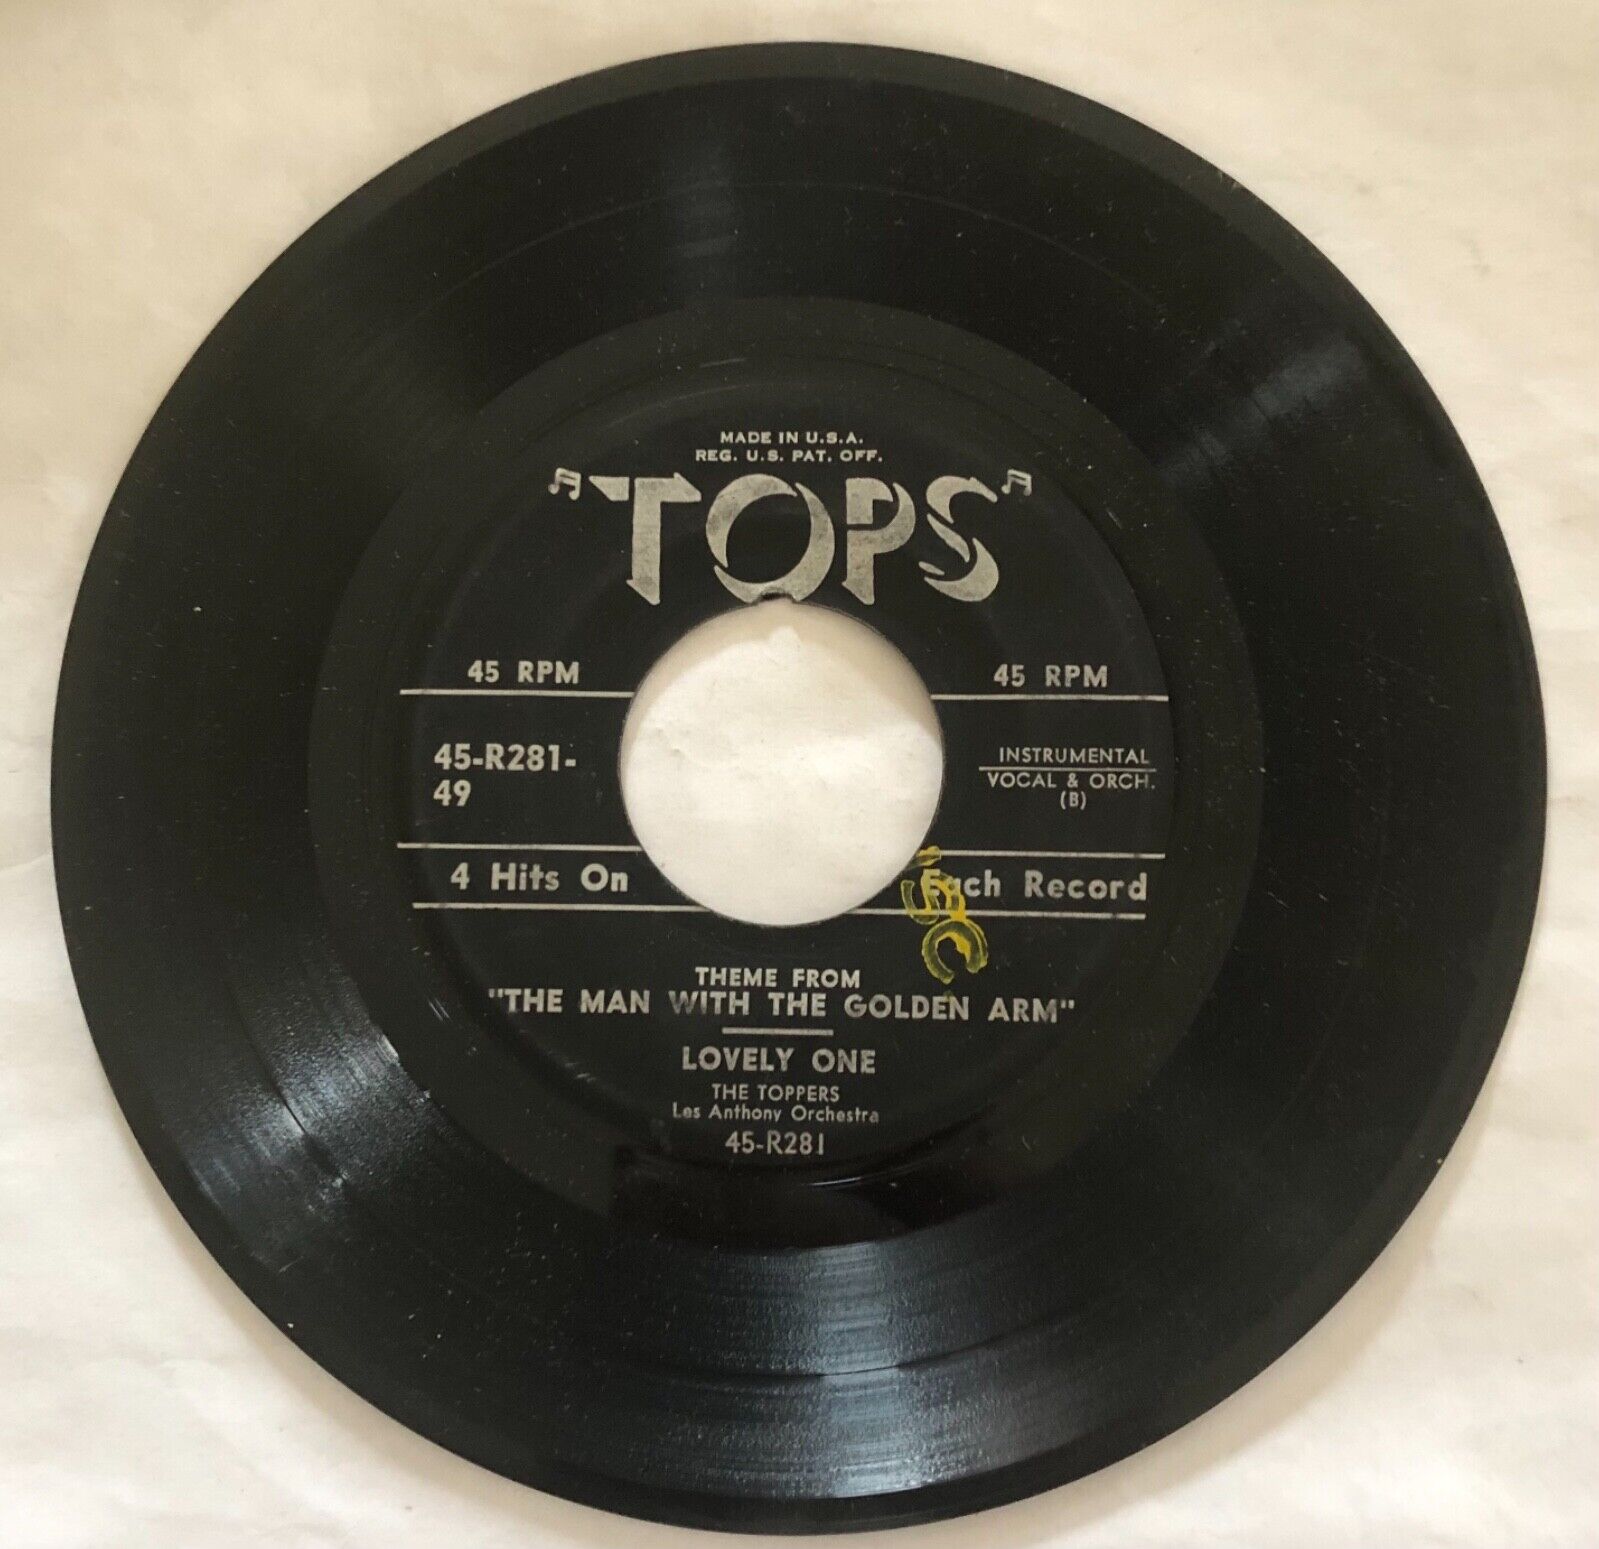 The Man With The Golden Arm - Lovely One / Hot Diggity - Eddie, My Love 45 rpm